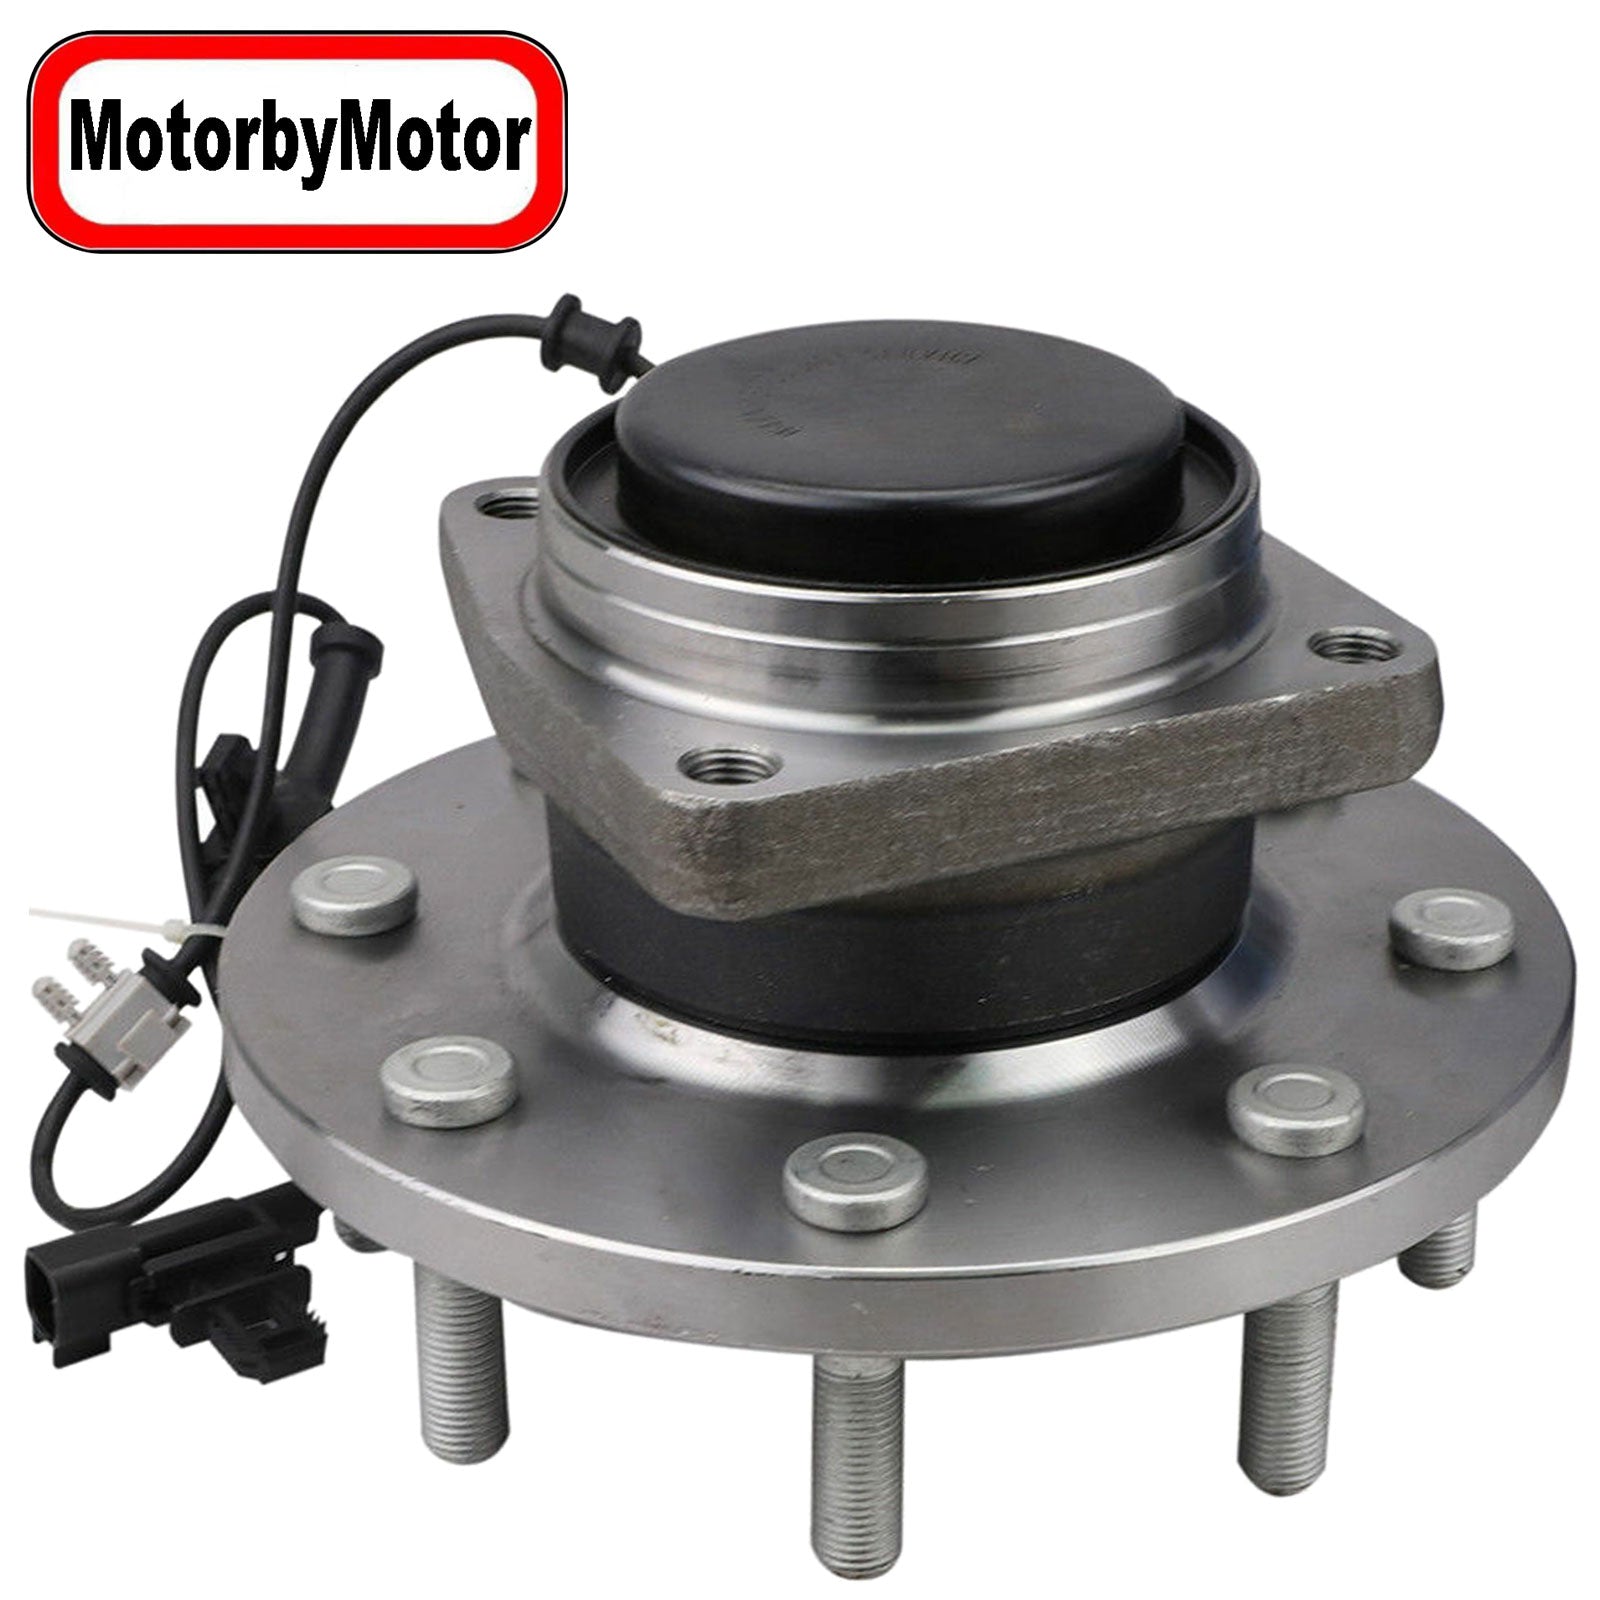 MotorbyMotor 515147 Front Wheel Bearing and Hub Assembly 2WD with 8 Lugs fits for Chevrolet Silverado 3500 HD,GMC Sierra 3500 HD Hub Bearing RWD, Dual Rear Wheel Models ONLY w/ABS MotorbyMotor